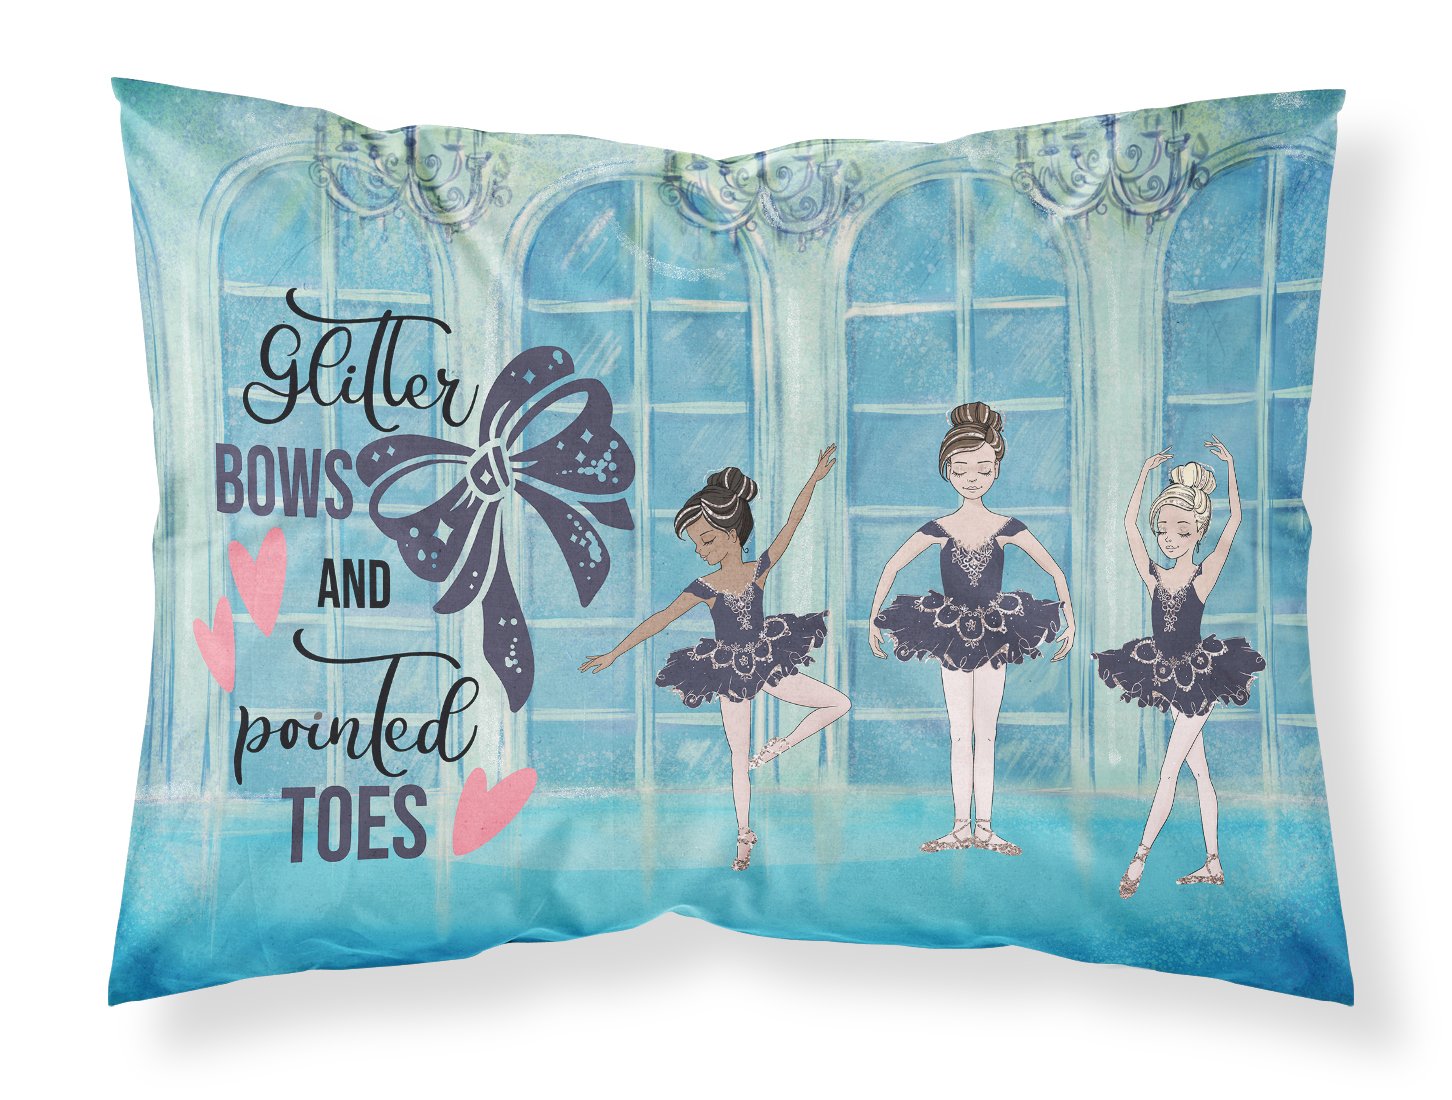 Buy this Glitter Bows and Pointed Toes Dance Fabric Standard Pillowcase